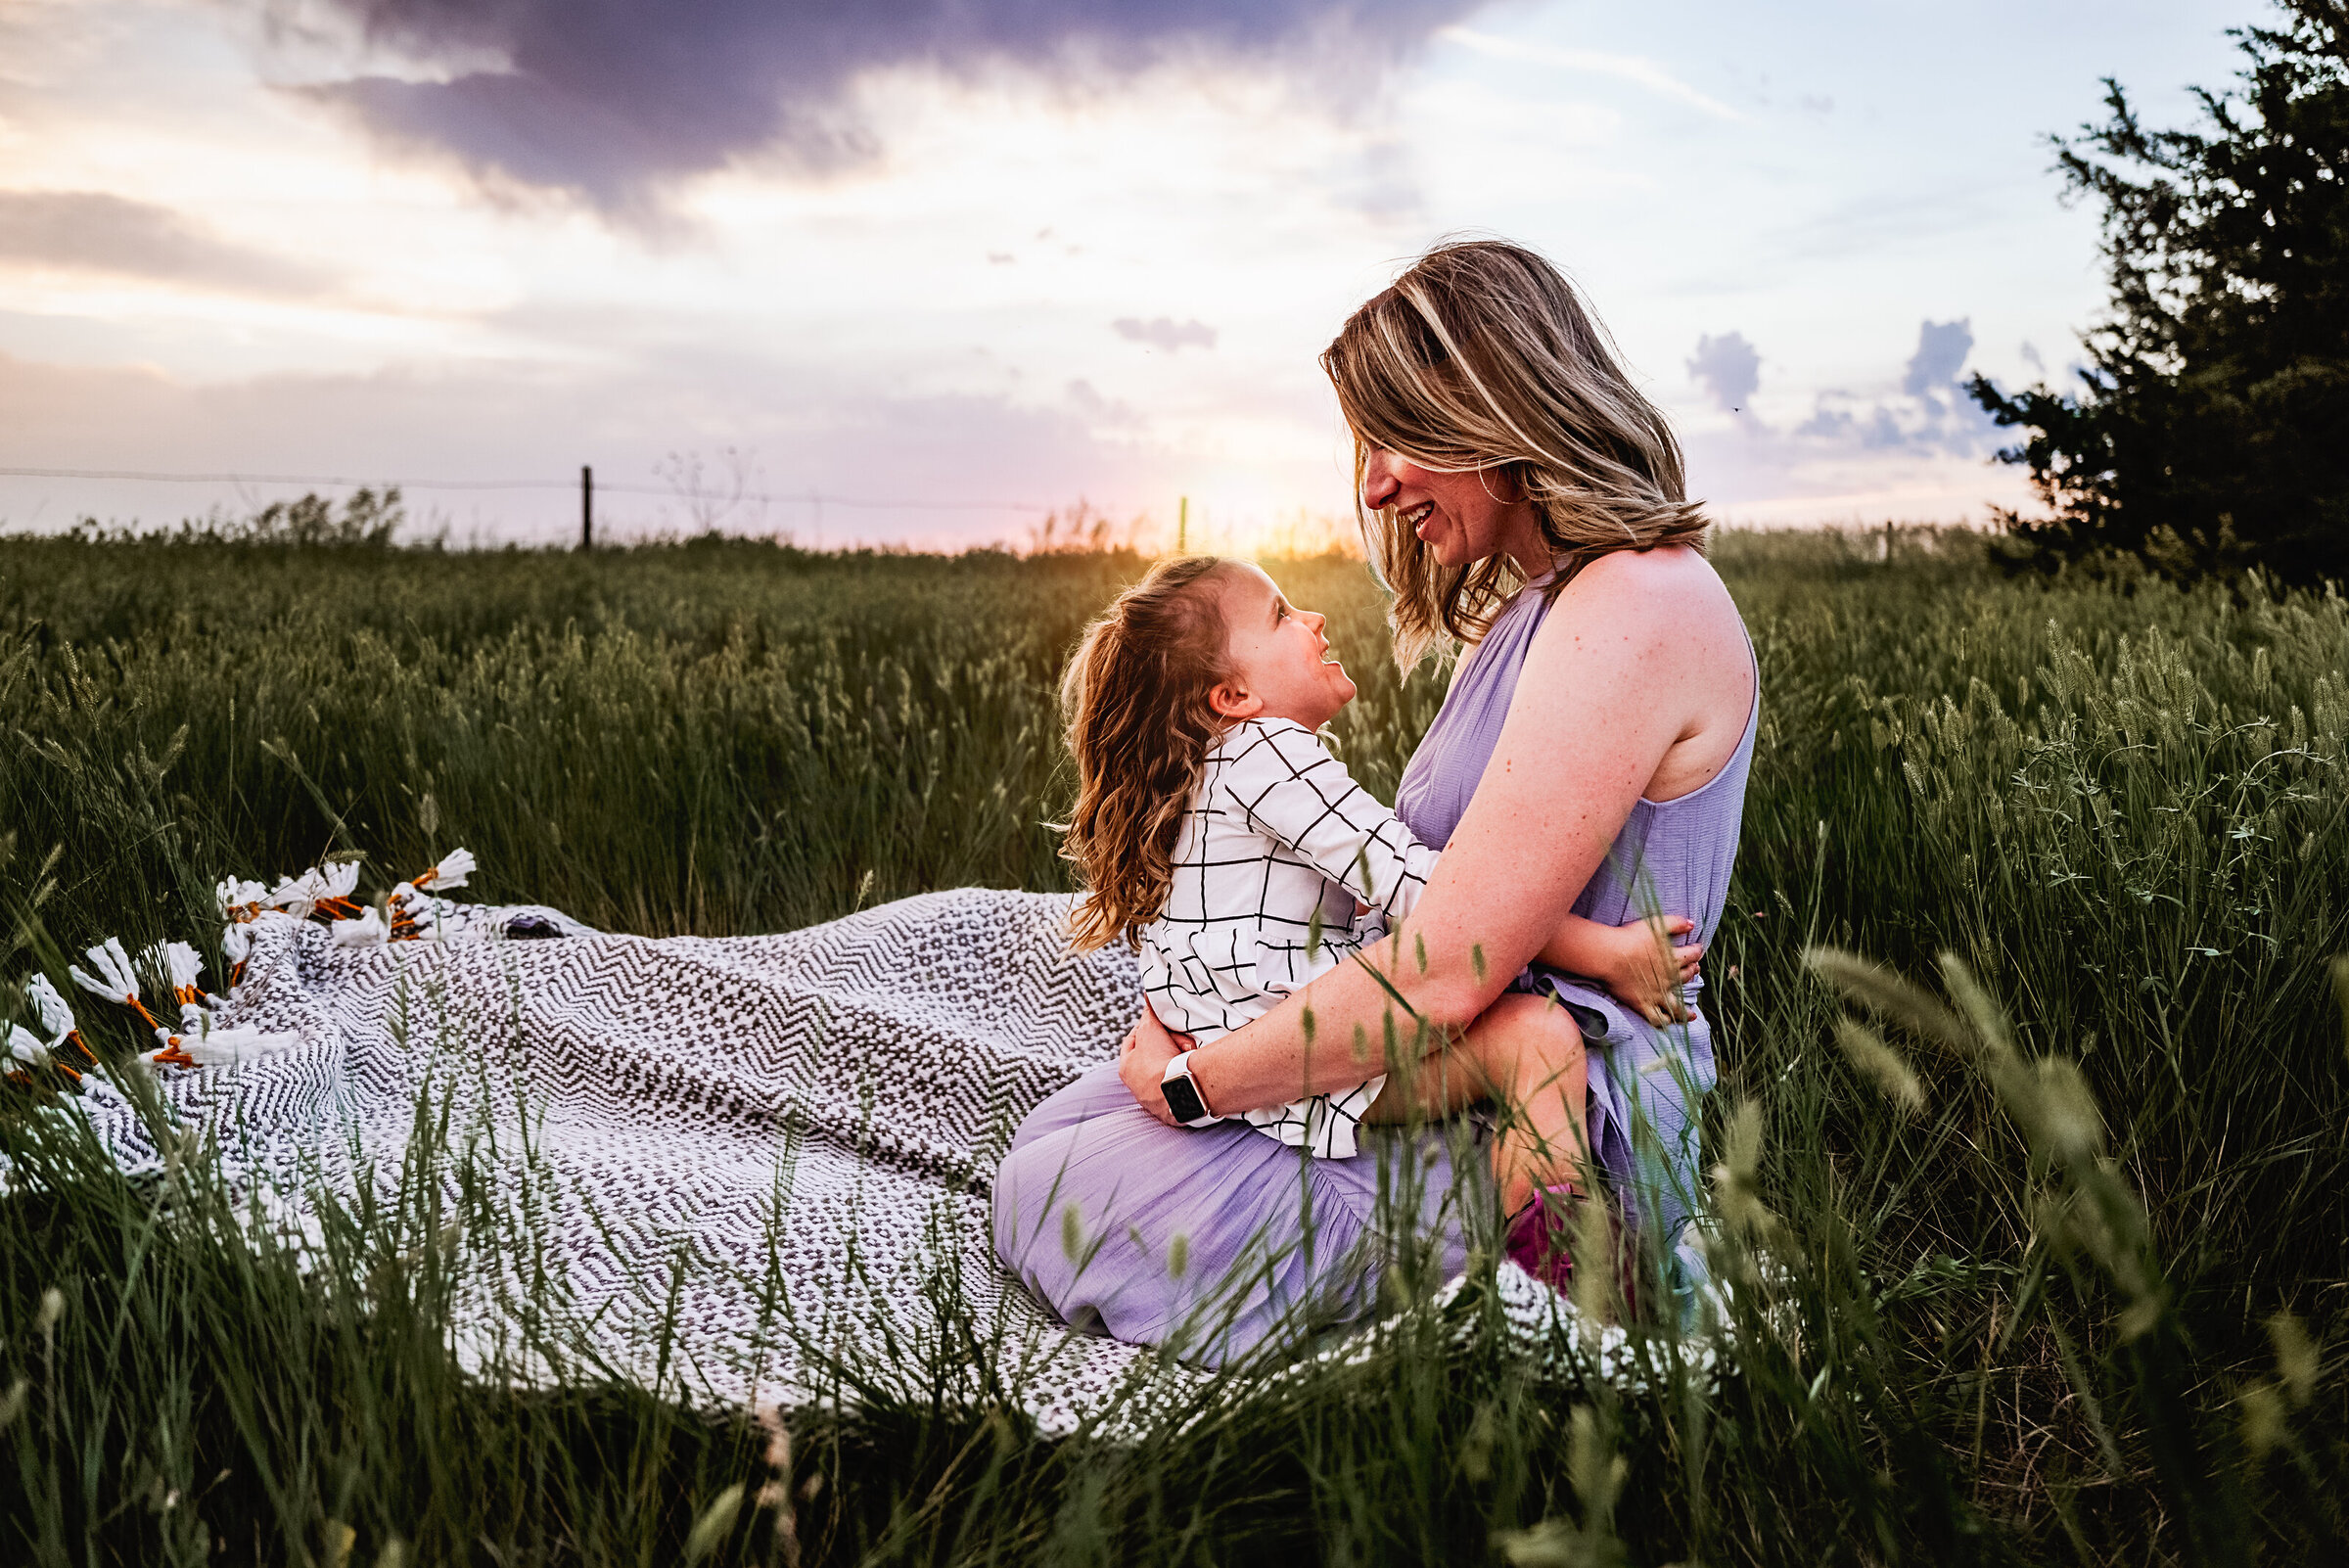 Mom and daughter sit on blanket in long grass smiling at each other